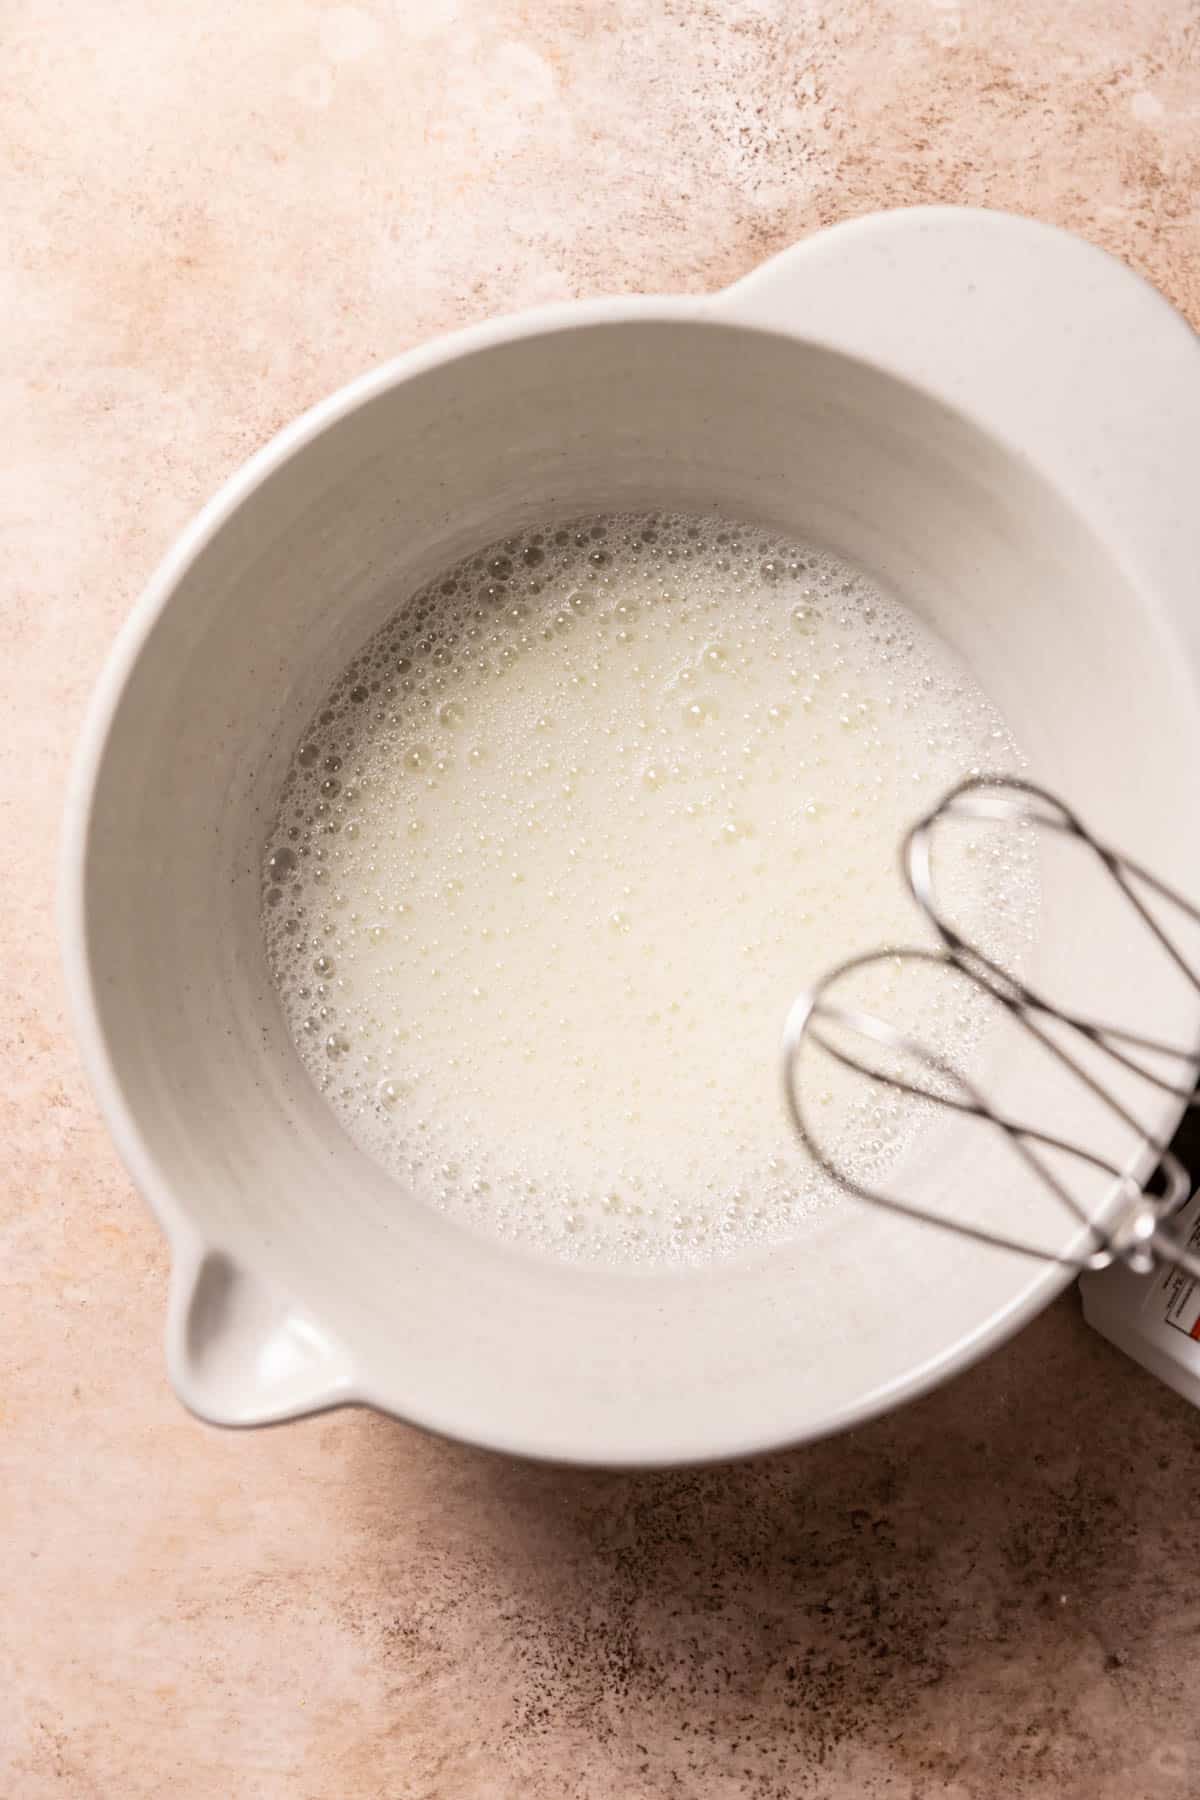 whisked egg whites in a mixing bowl.